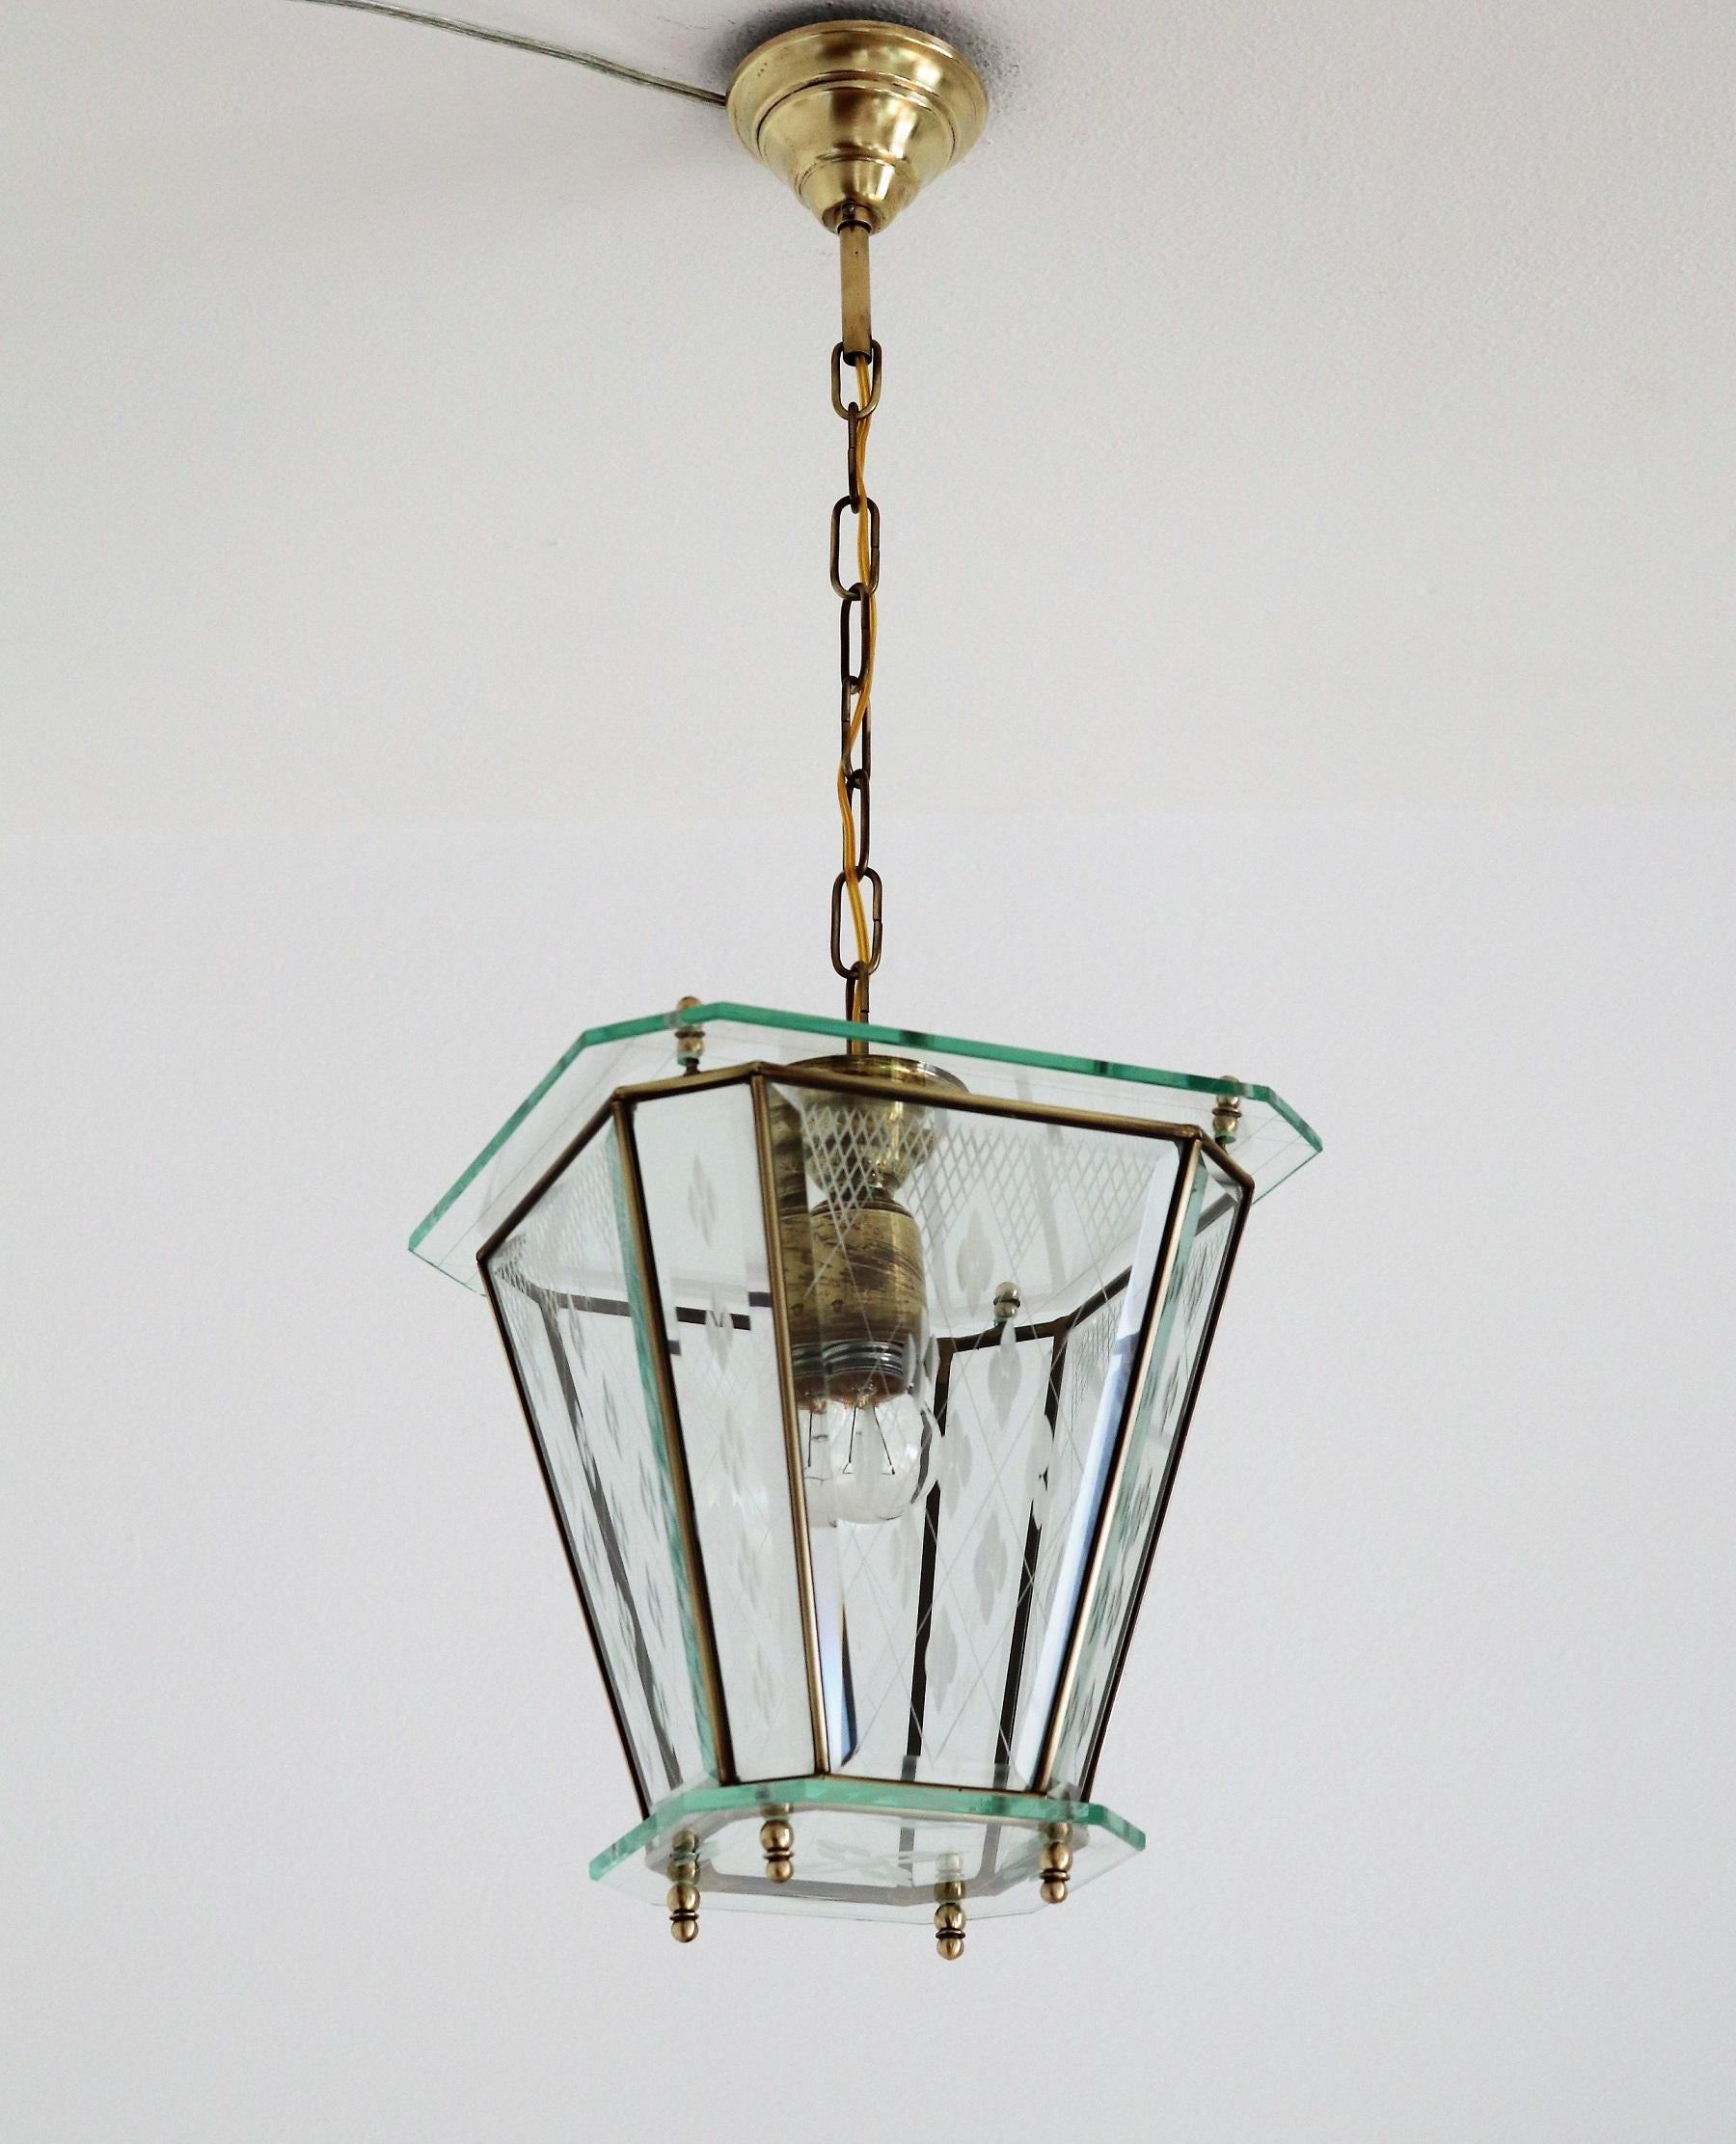 Gorgeous pendant lamp or lantern made of beautifully cut glass and brass details.
Made in Italy in the 1950s.
Perfect for a small room, bathroom or an entryway.
The cut glass is much better to see in person and the brass has fantastic patina from